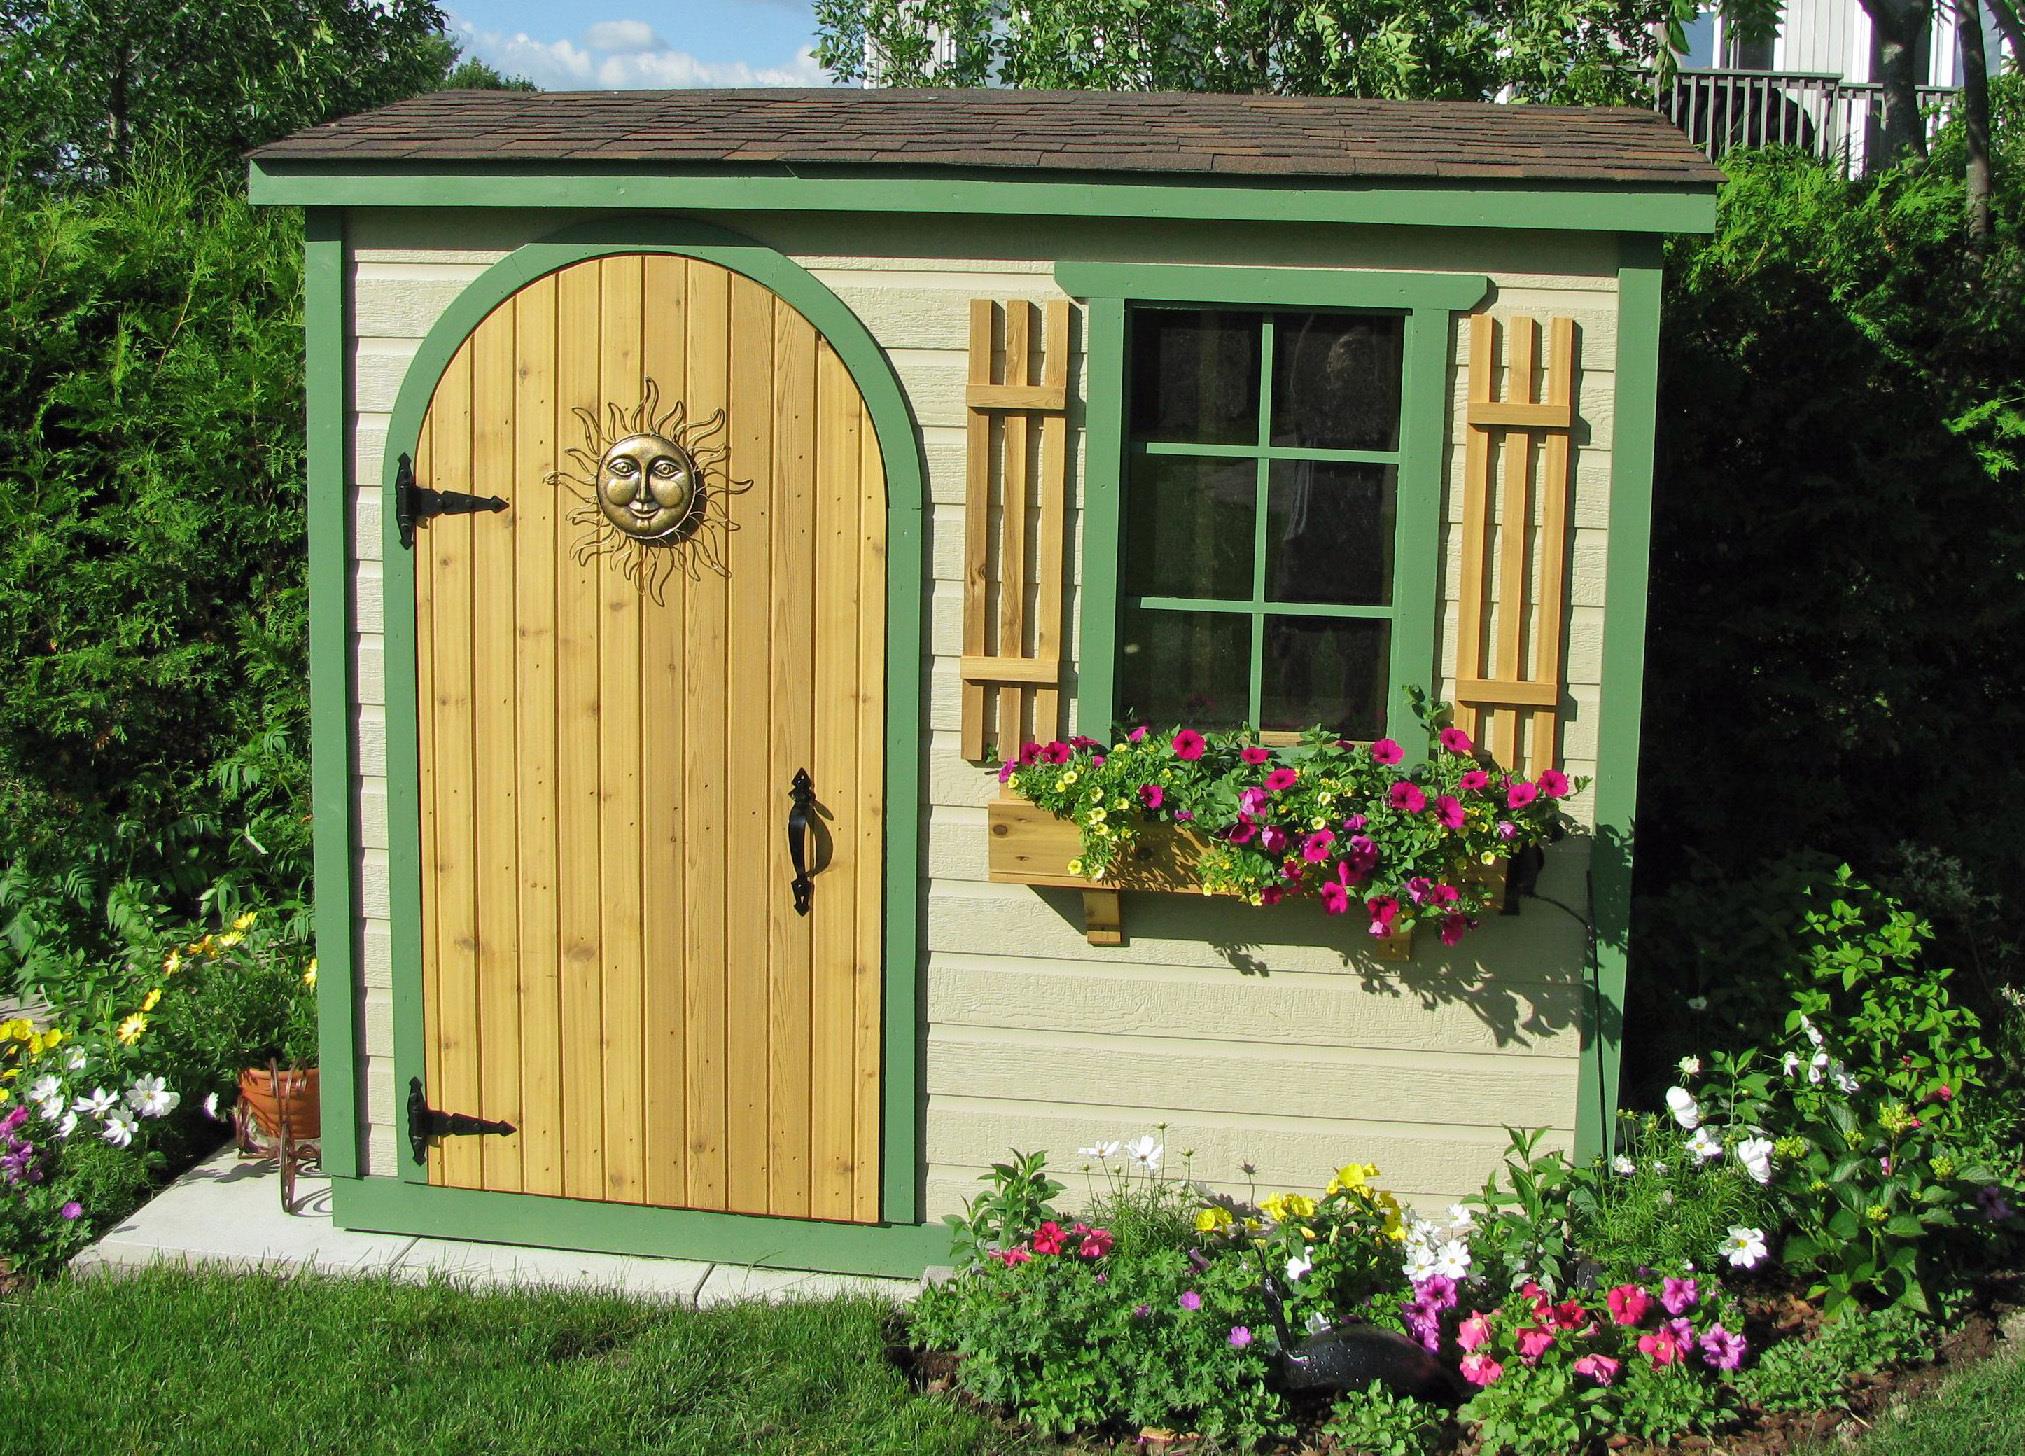 Canexel Sarawak shed 3x8 with arched single door in Nestleton, Ontario. ID number 115614-2